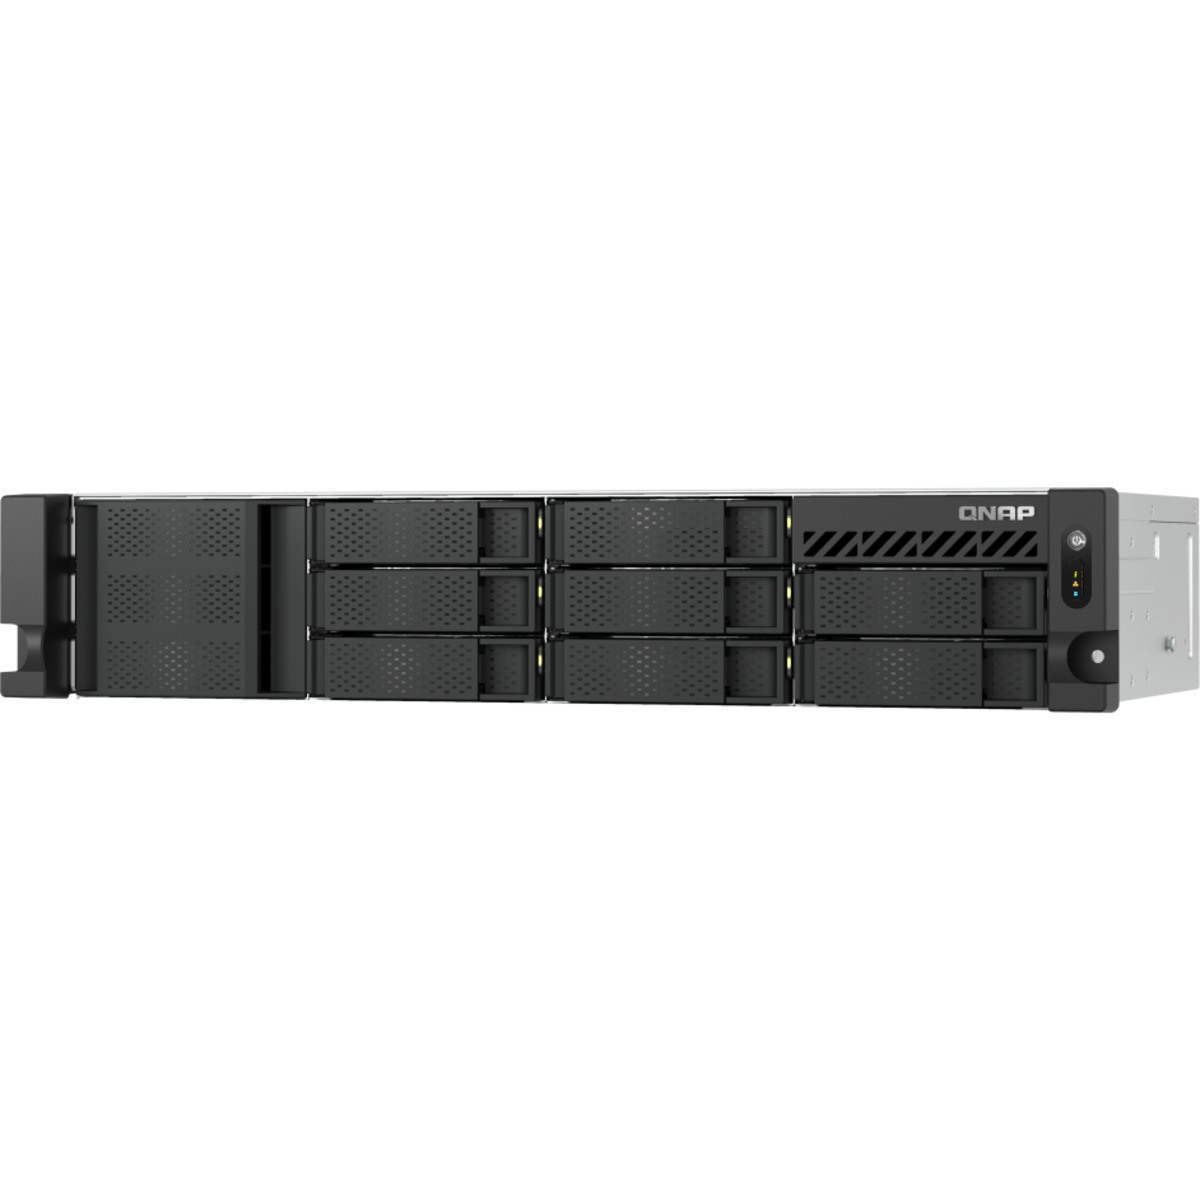 QNAP TS-855eU-RP 60tb 8-Bay RackMount Multimedia / Power User / Business NAS - Network Attached Storage Device 6x10tb Western Digital Red Pro WD102KFBX 3.5 7200rpm SATA 6Gb/s HDD NAS Class Drives Installed - Burn-In Tested - FREE RAM UPGRADE TS-855eU-RP